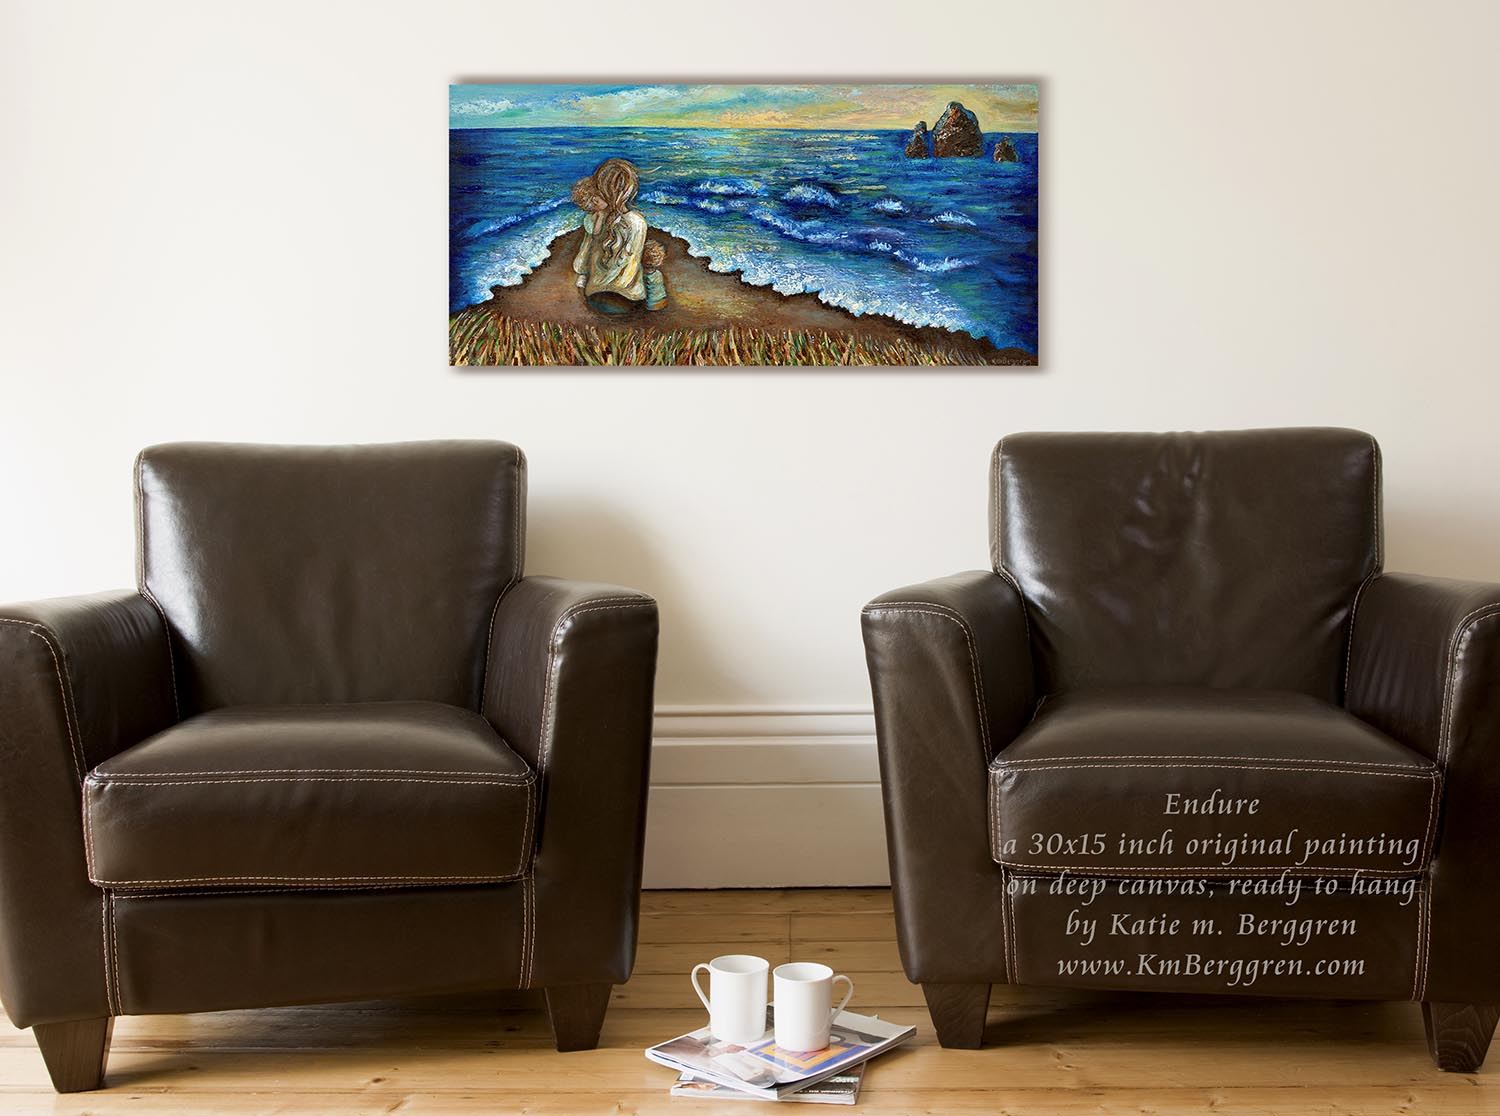 original art of mother and 2 children sitting on beach, painting of mom hugging children by the seashore, cool calm artwork, contentment art, relaxing peaceful painting shown on sitting room wall